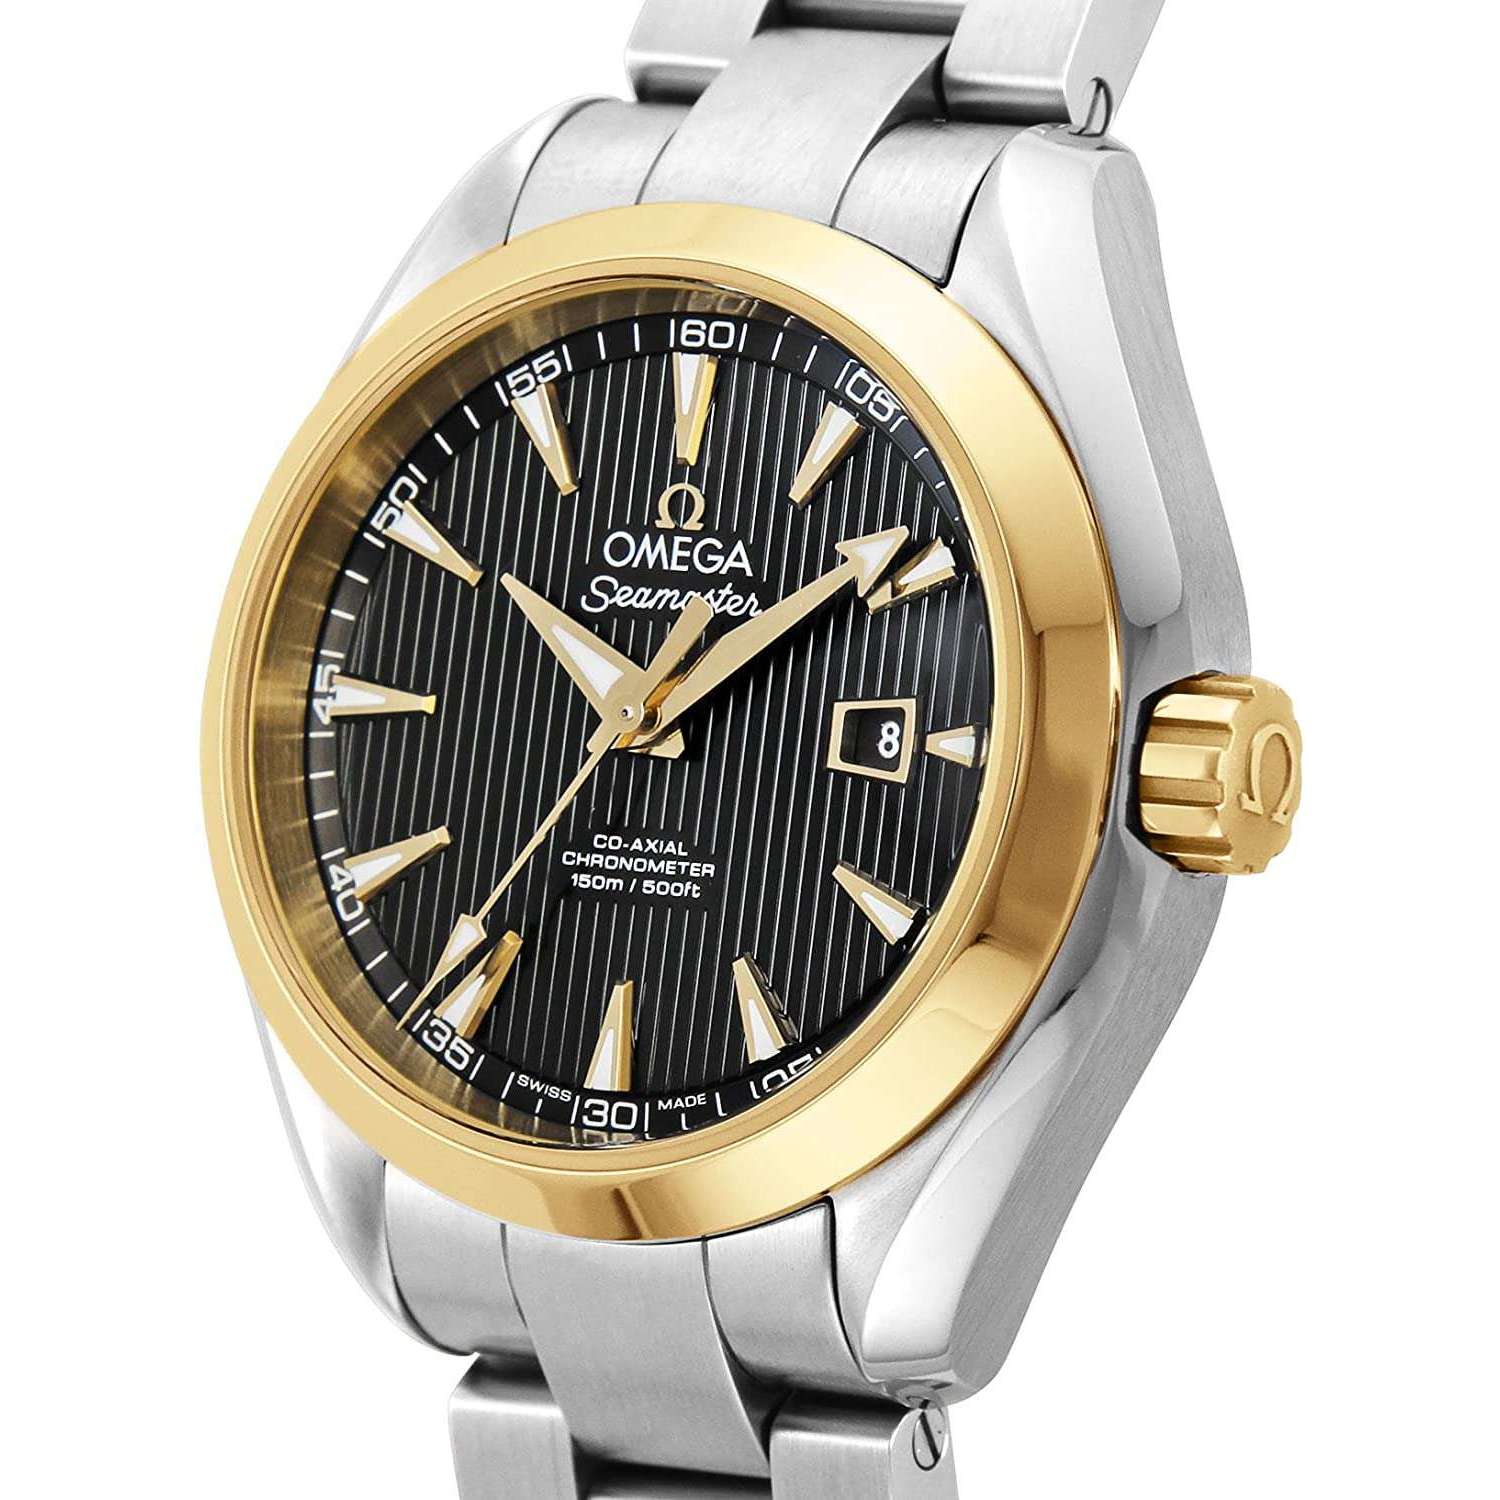 ROOK JAPAN:OMEGA SEAMASTER CO-AXIAL CHRONOMETER 34 MM MEN WATCH 231.20.34.20.01.004,Luxury Watch,Omega